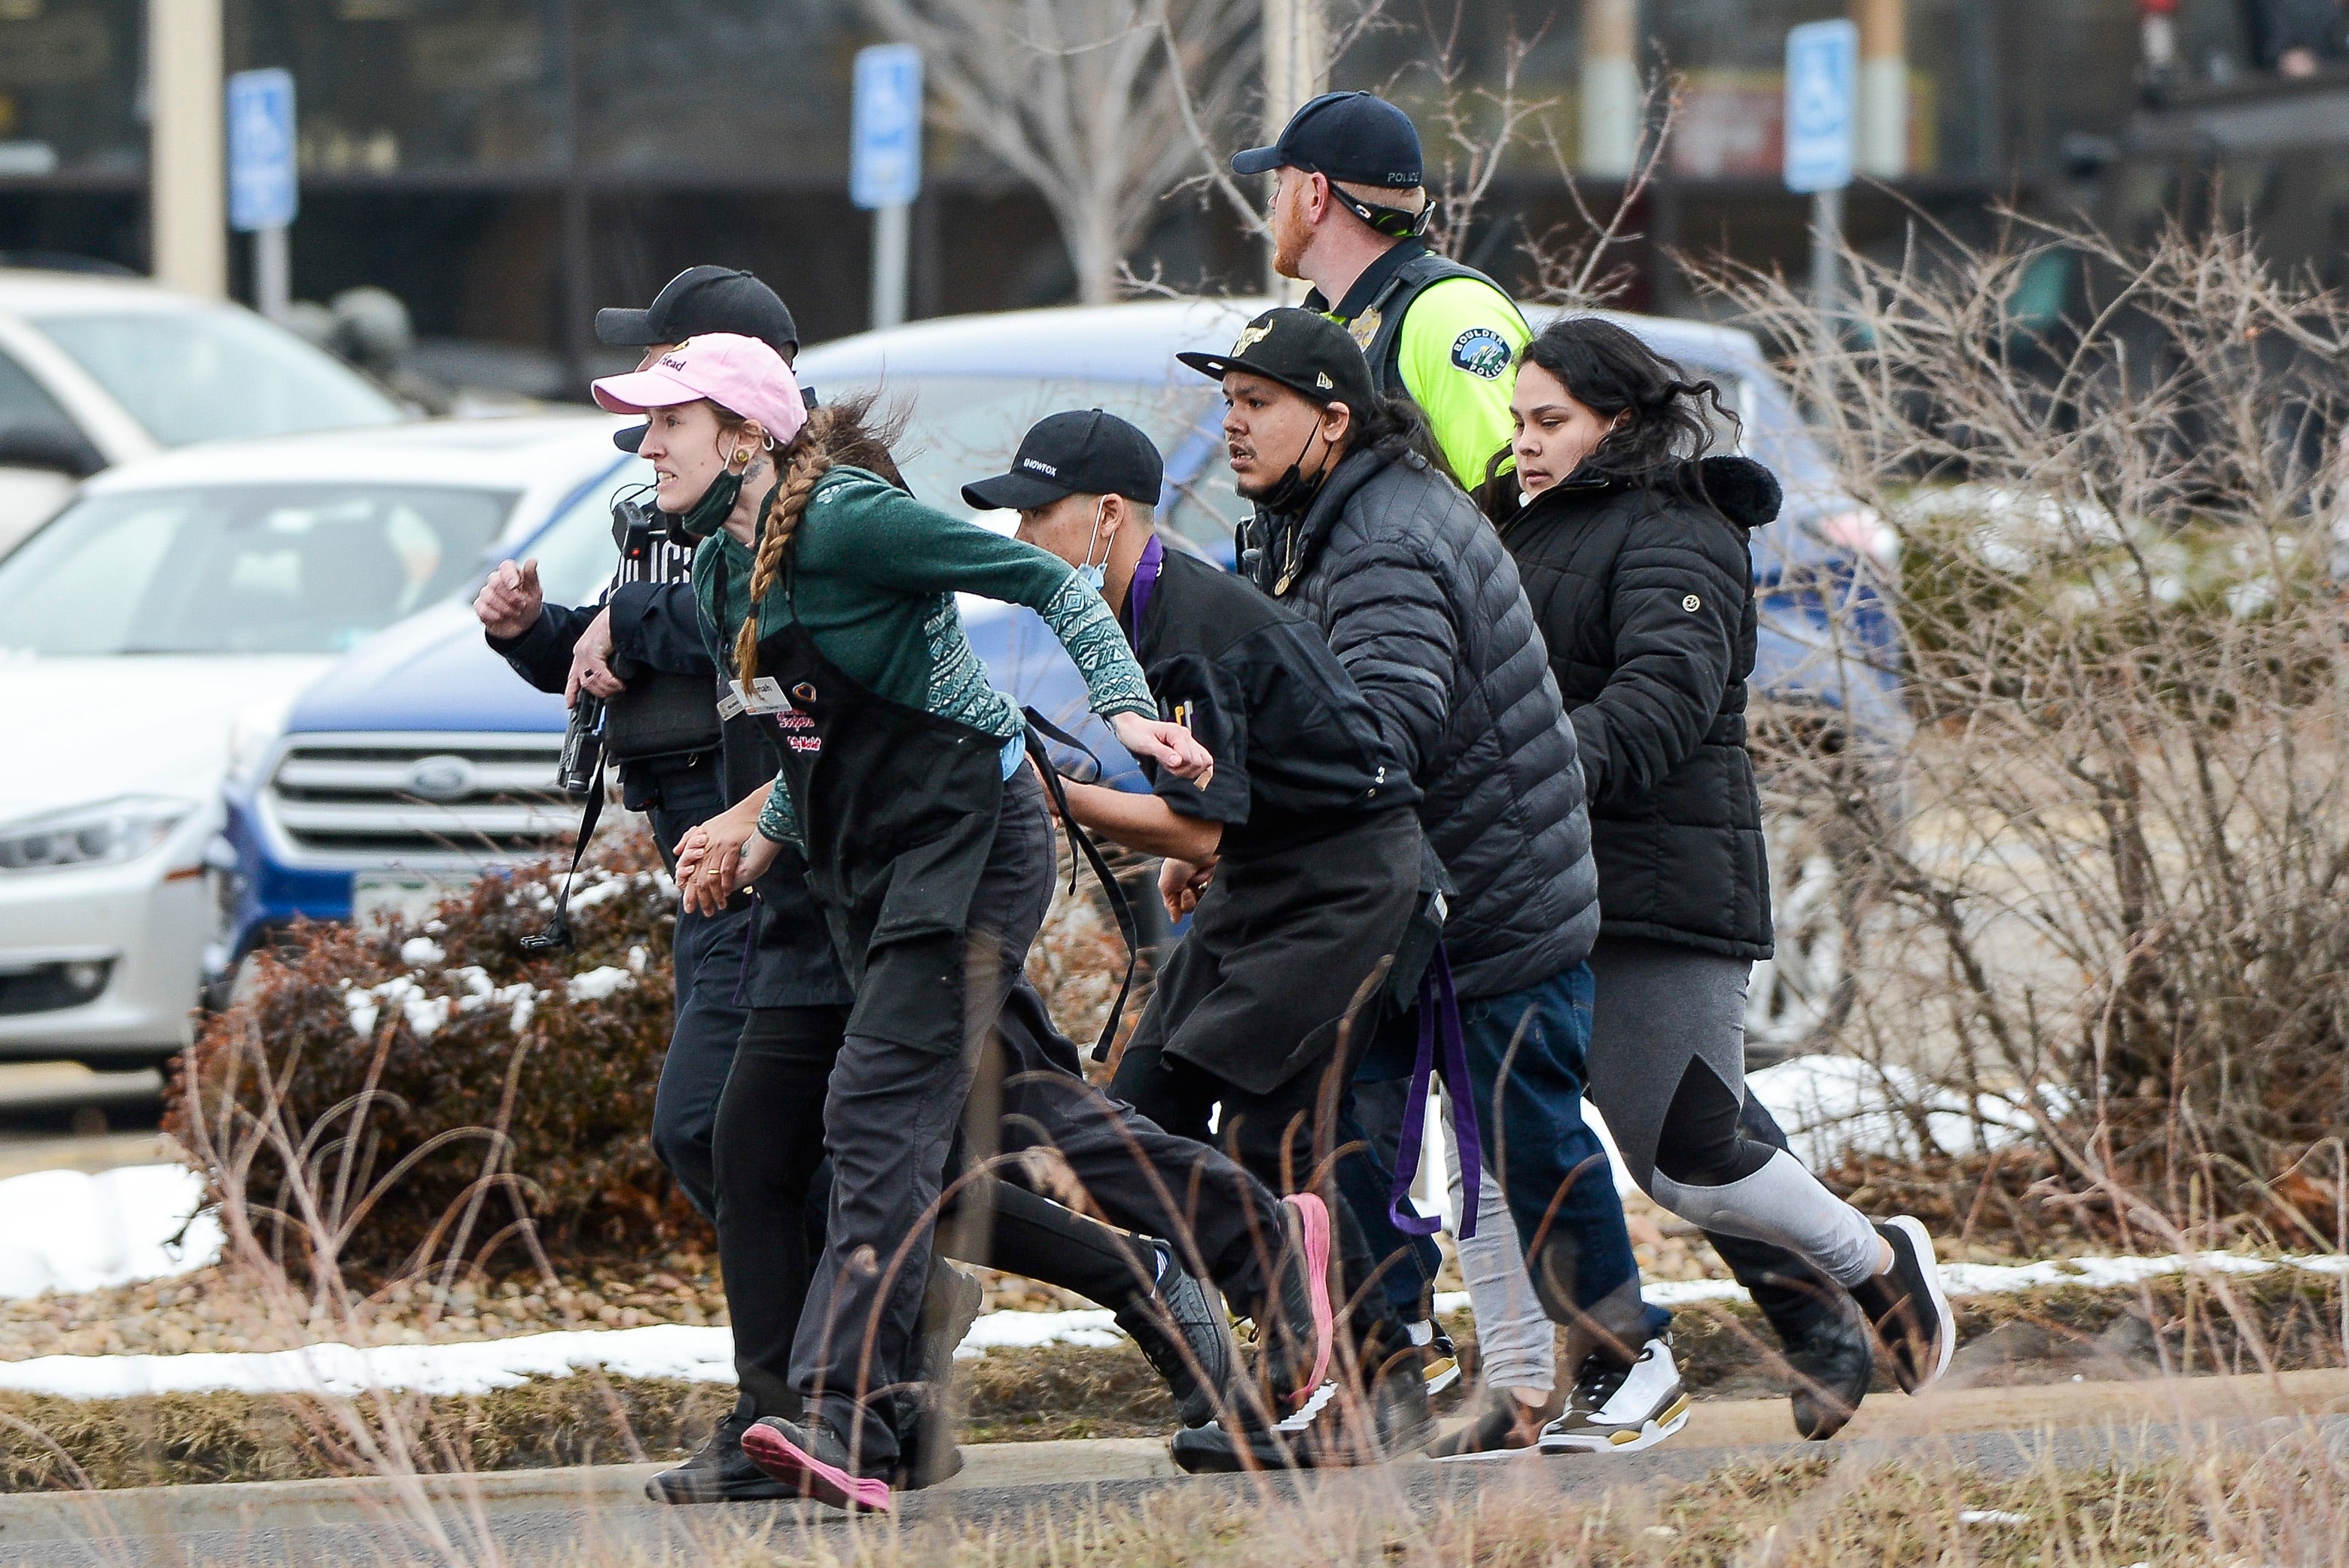 King Soopers employees are led away from an active shooter at the King Soopers grocery store in Boulder Colo. on March 22. 2021.